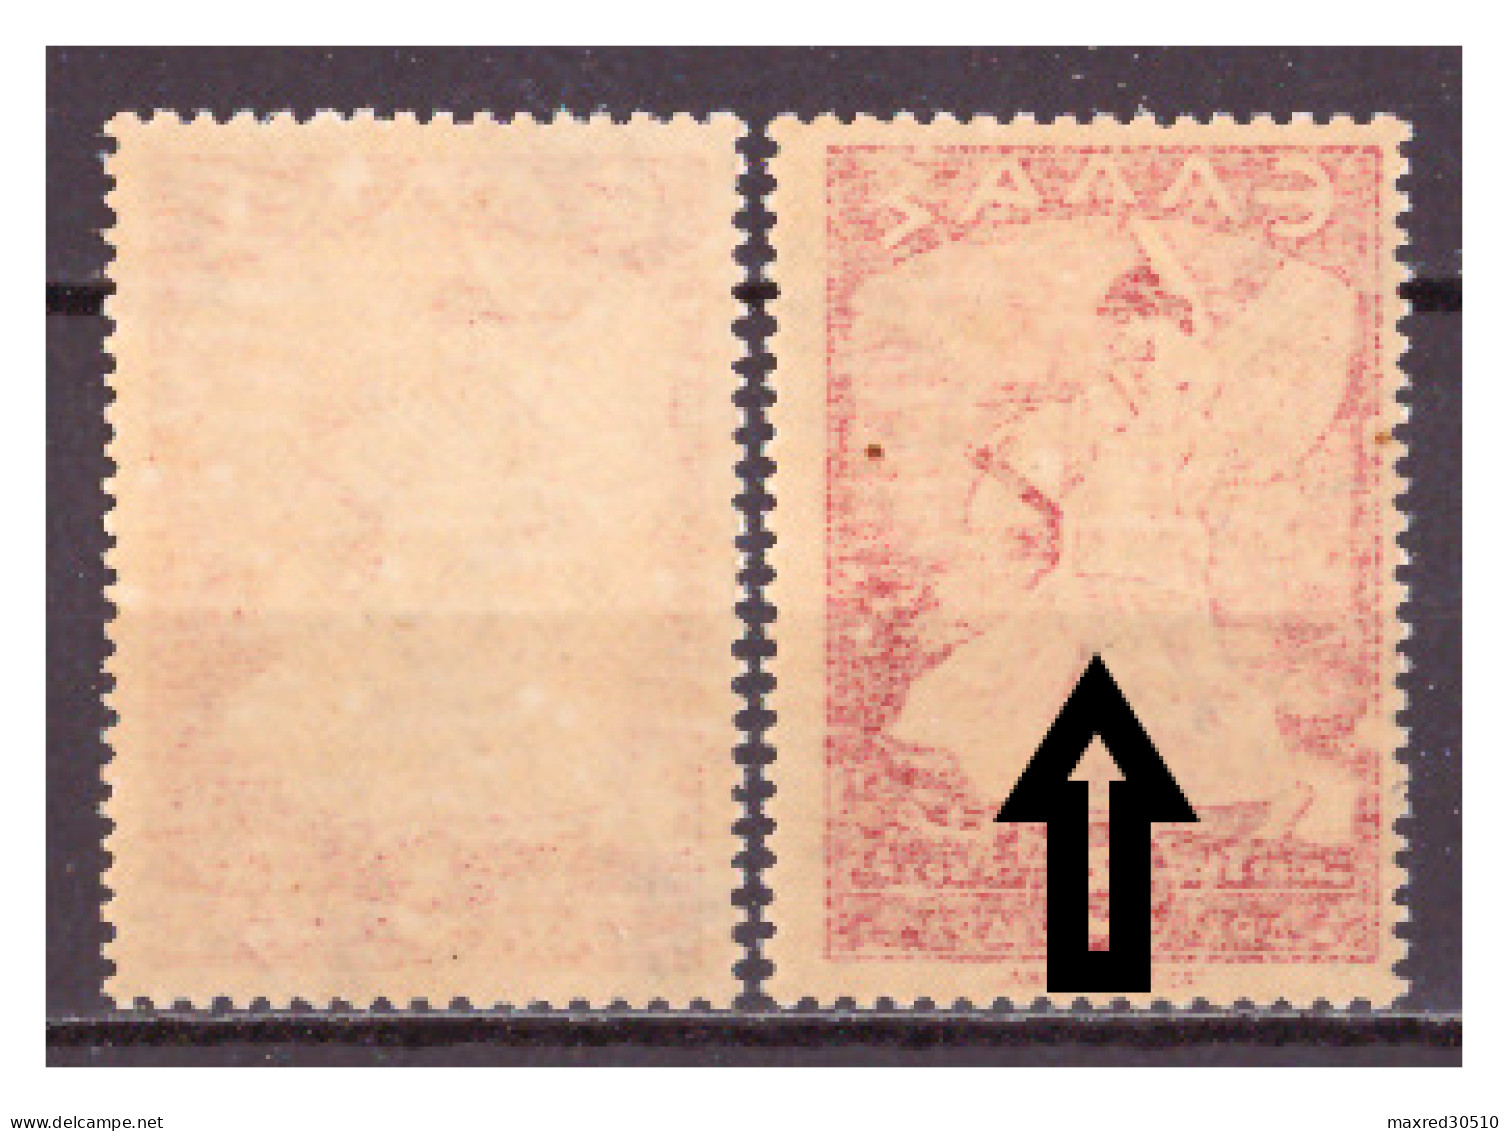 GREECE 1945 2X3L. OF THE "GLORY ISSUE" THE 2ND ONE (SEE ARROWS) WITH MIRROR PRINTING AT THE GUM ERROR MNH - Variétés Et Curiosités